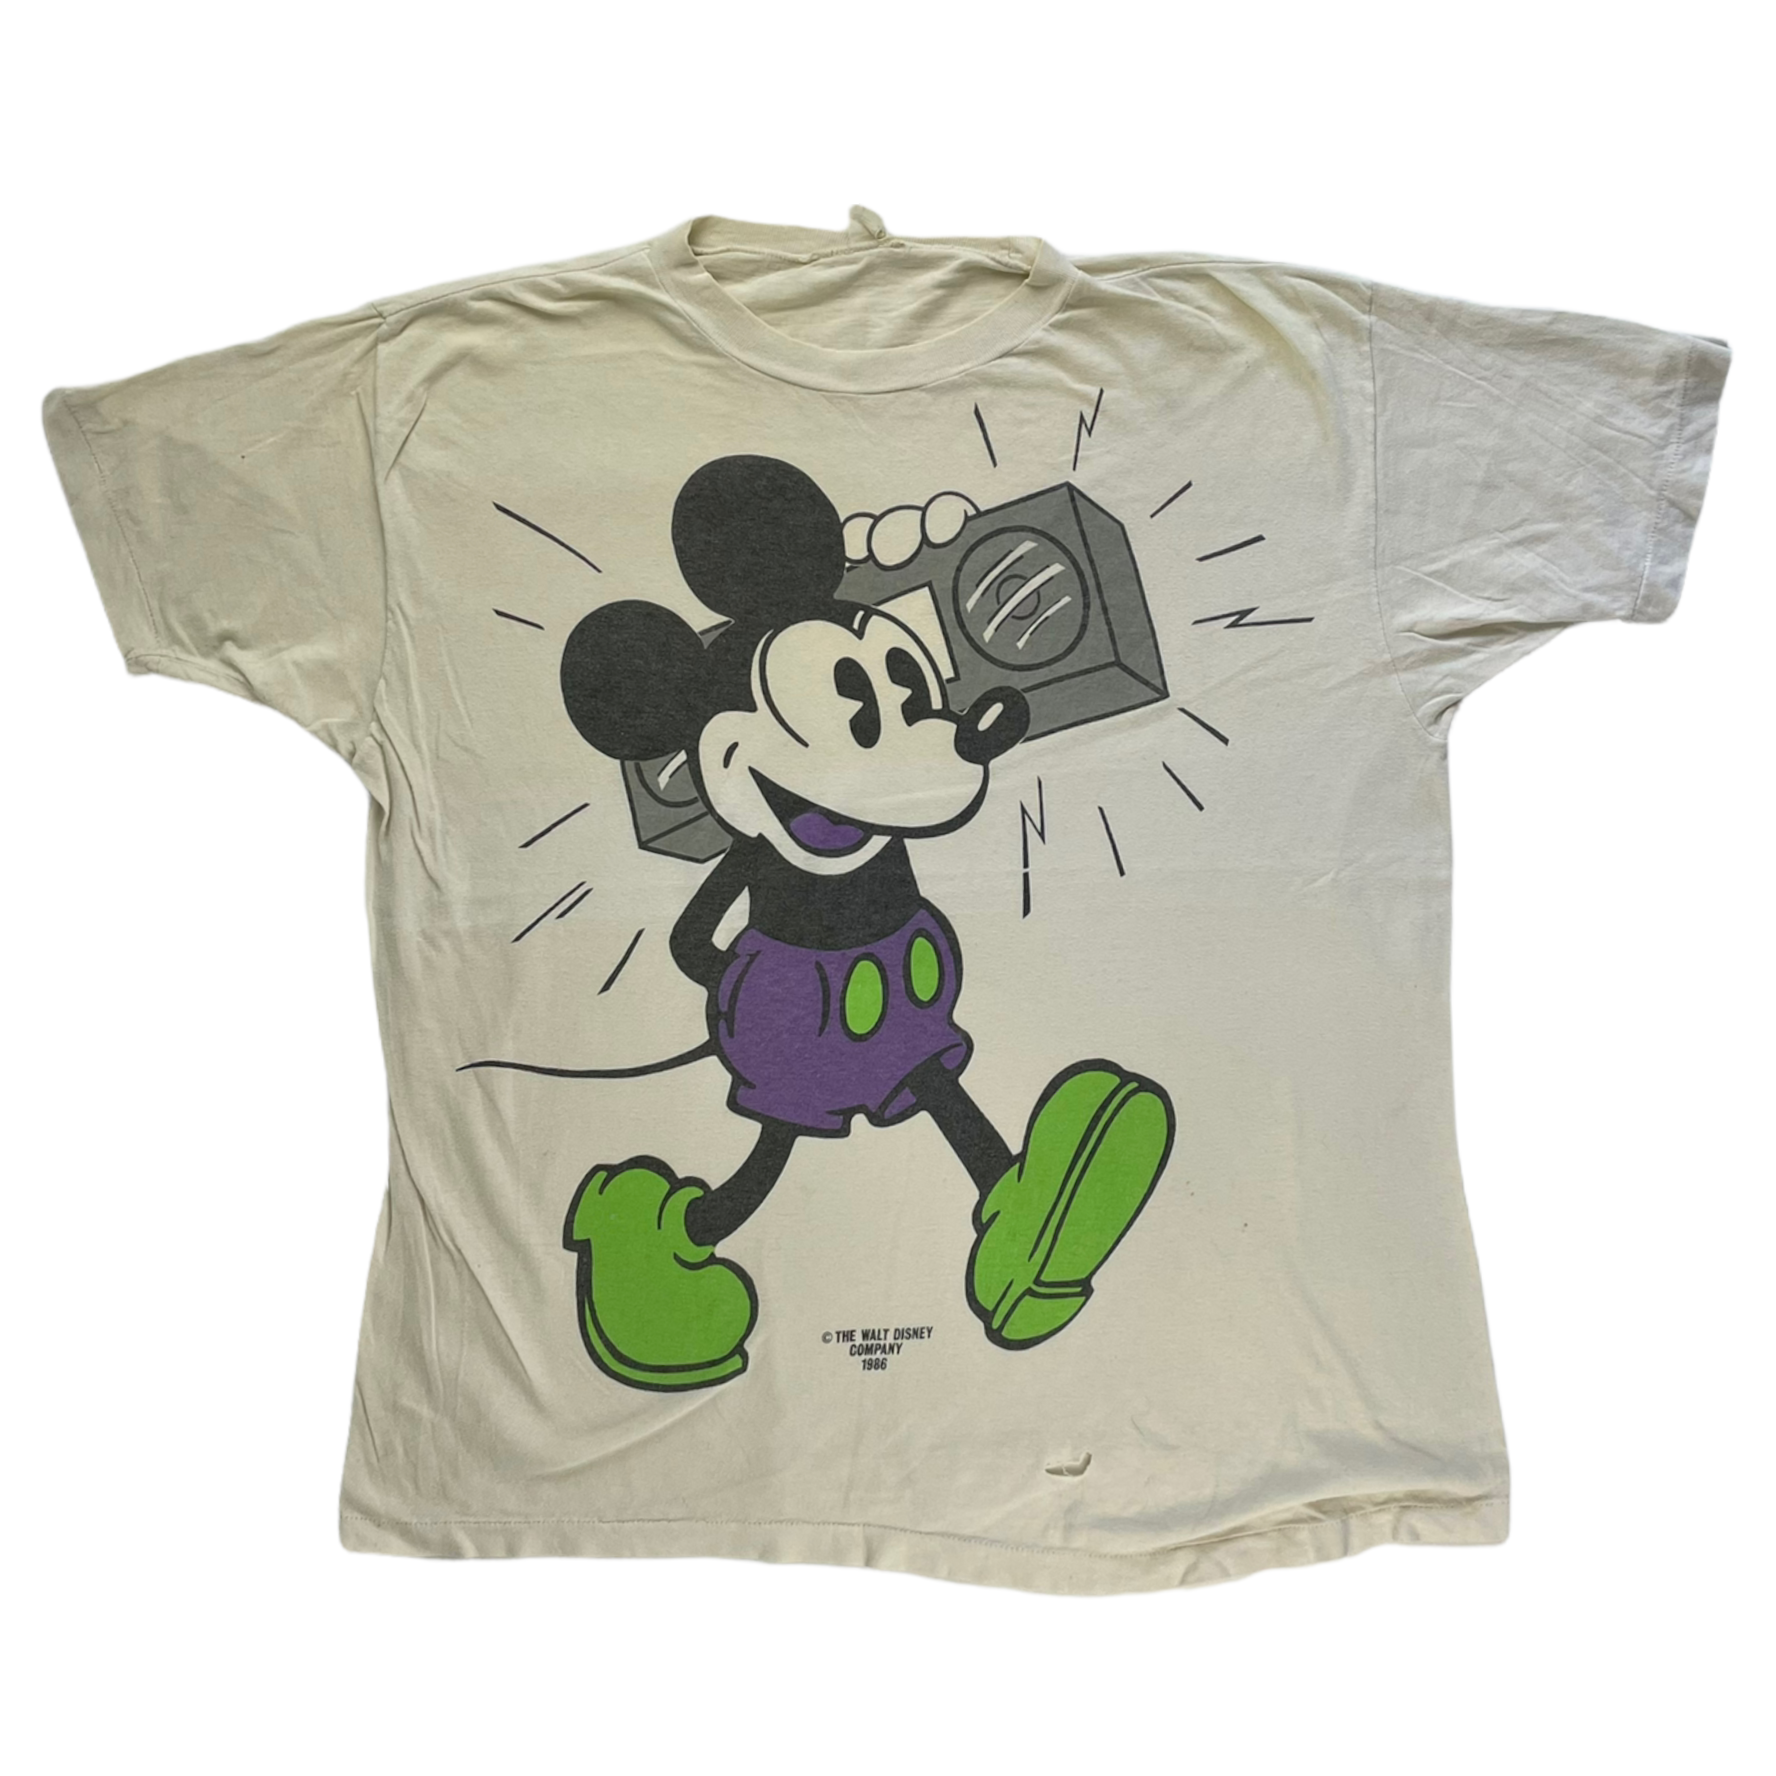 Vintage 80s Mickey Mouse T-shirt, - Restorecph